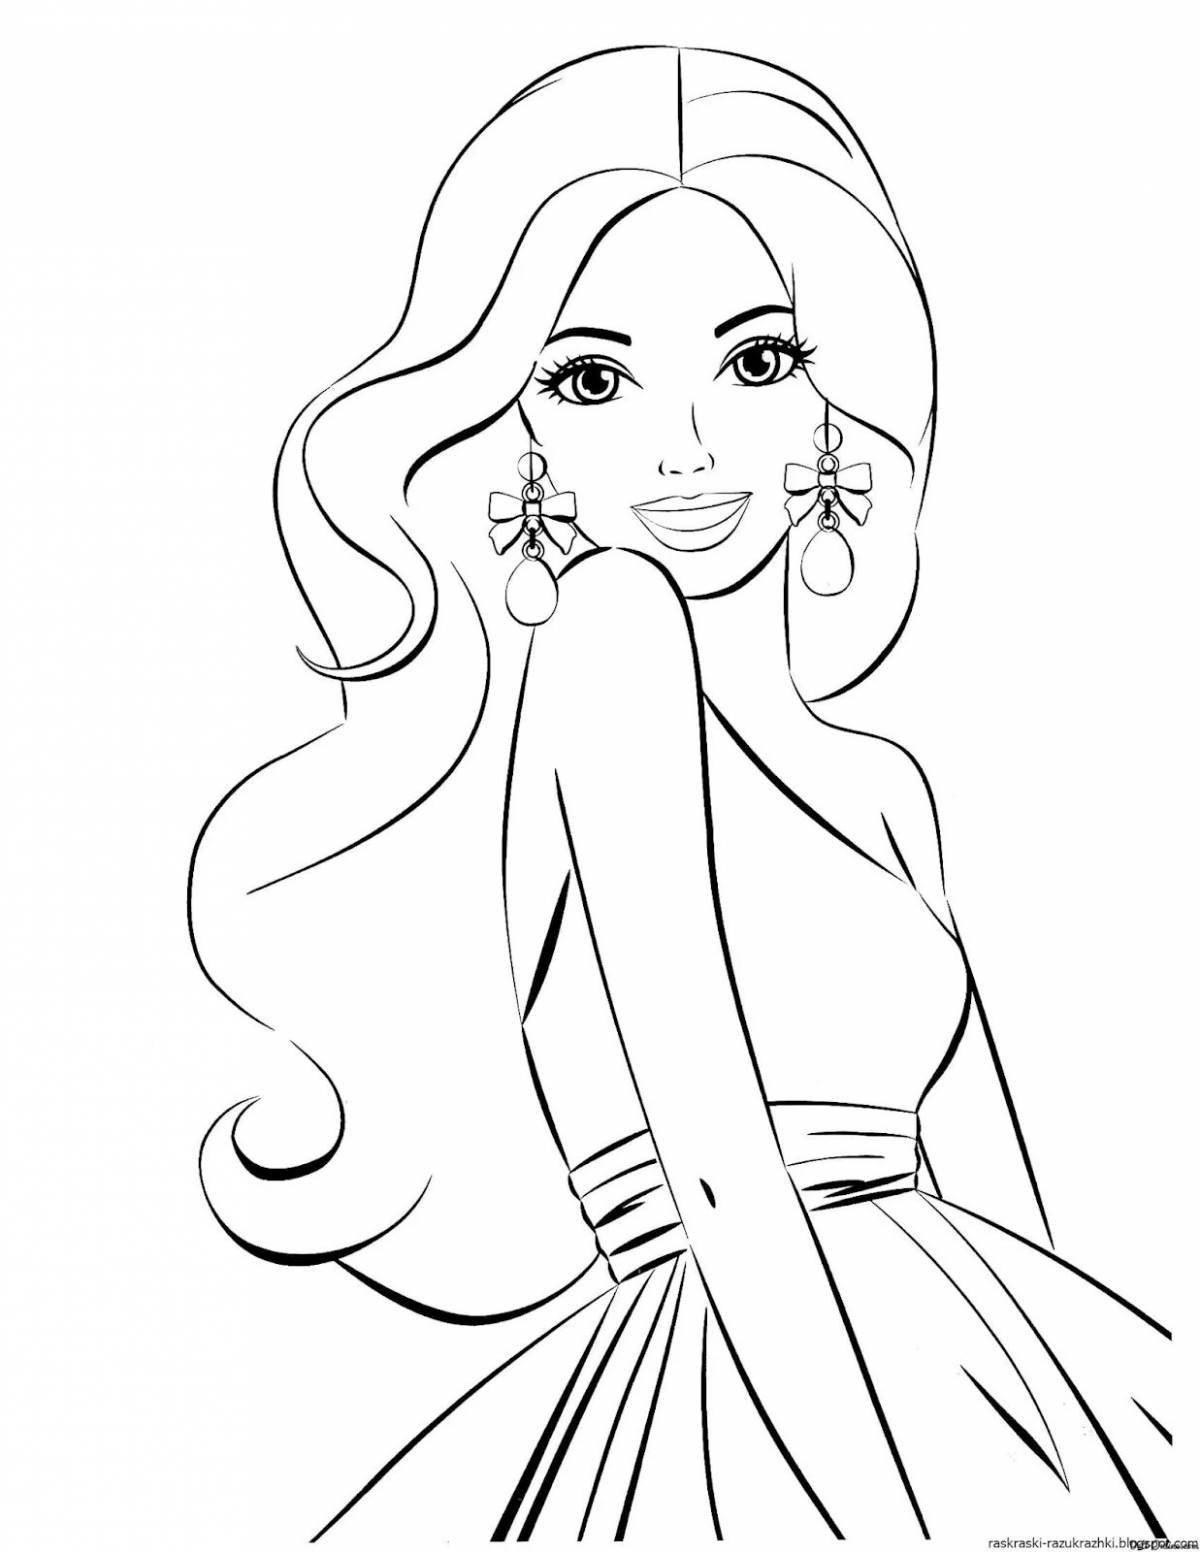 Awesome youtube coloring pages for girls